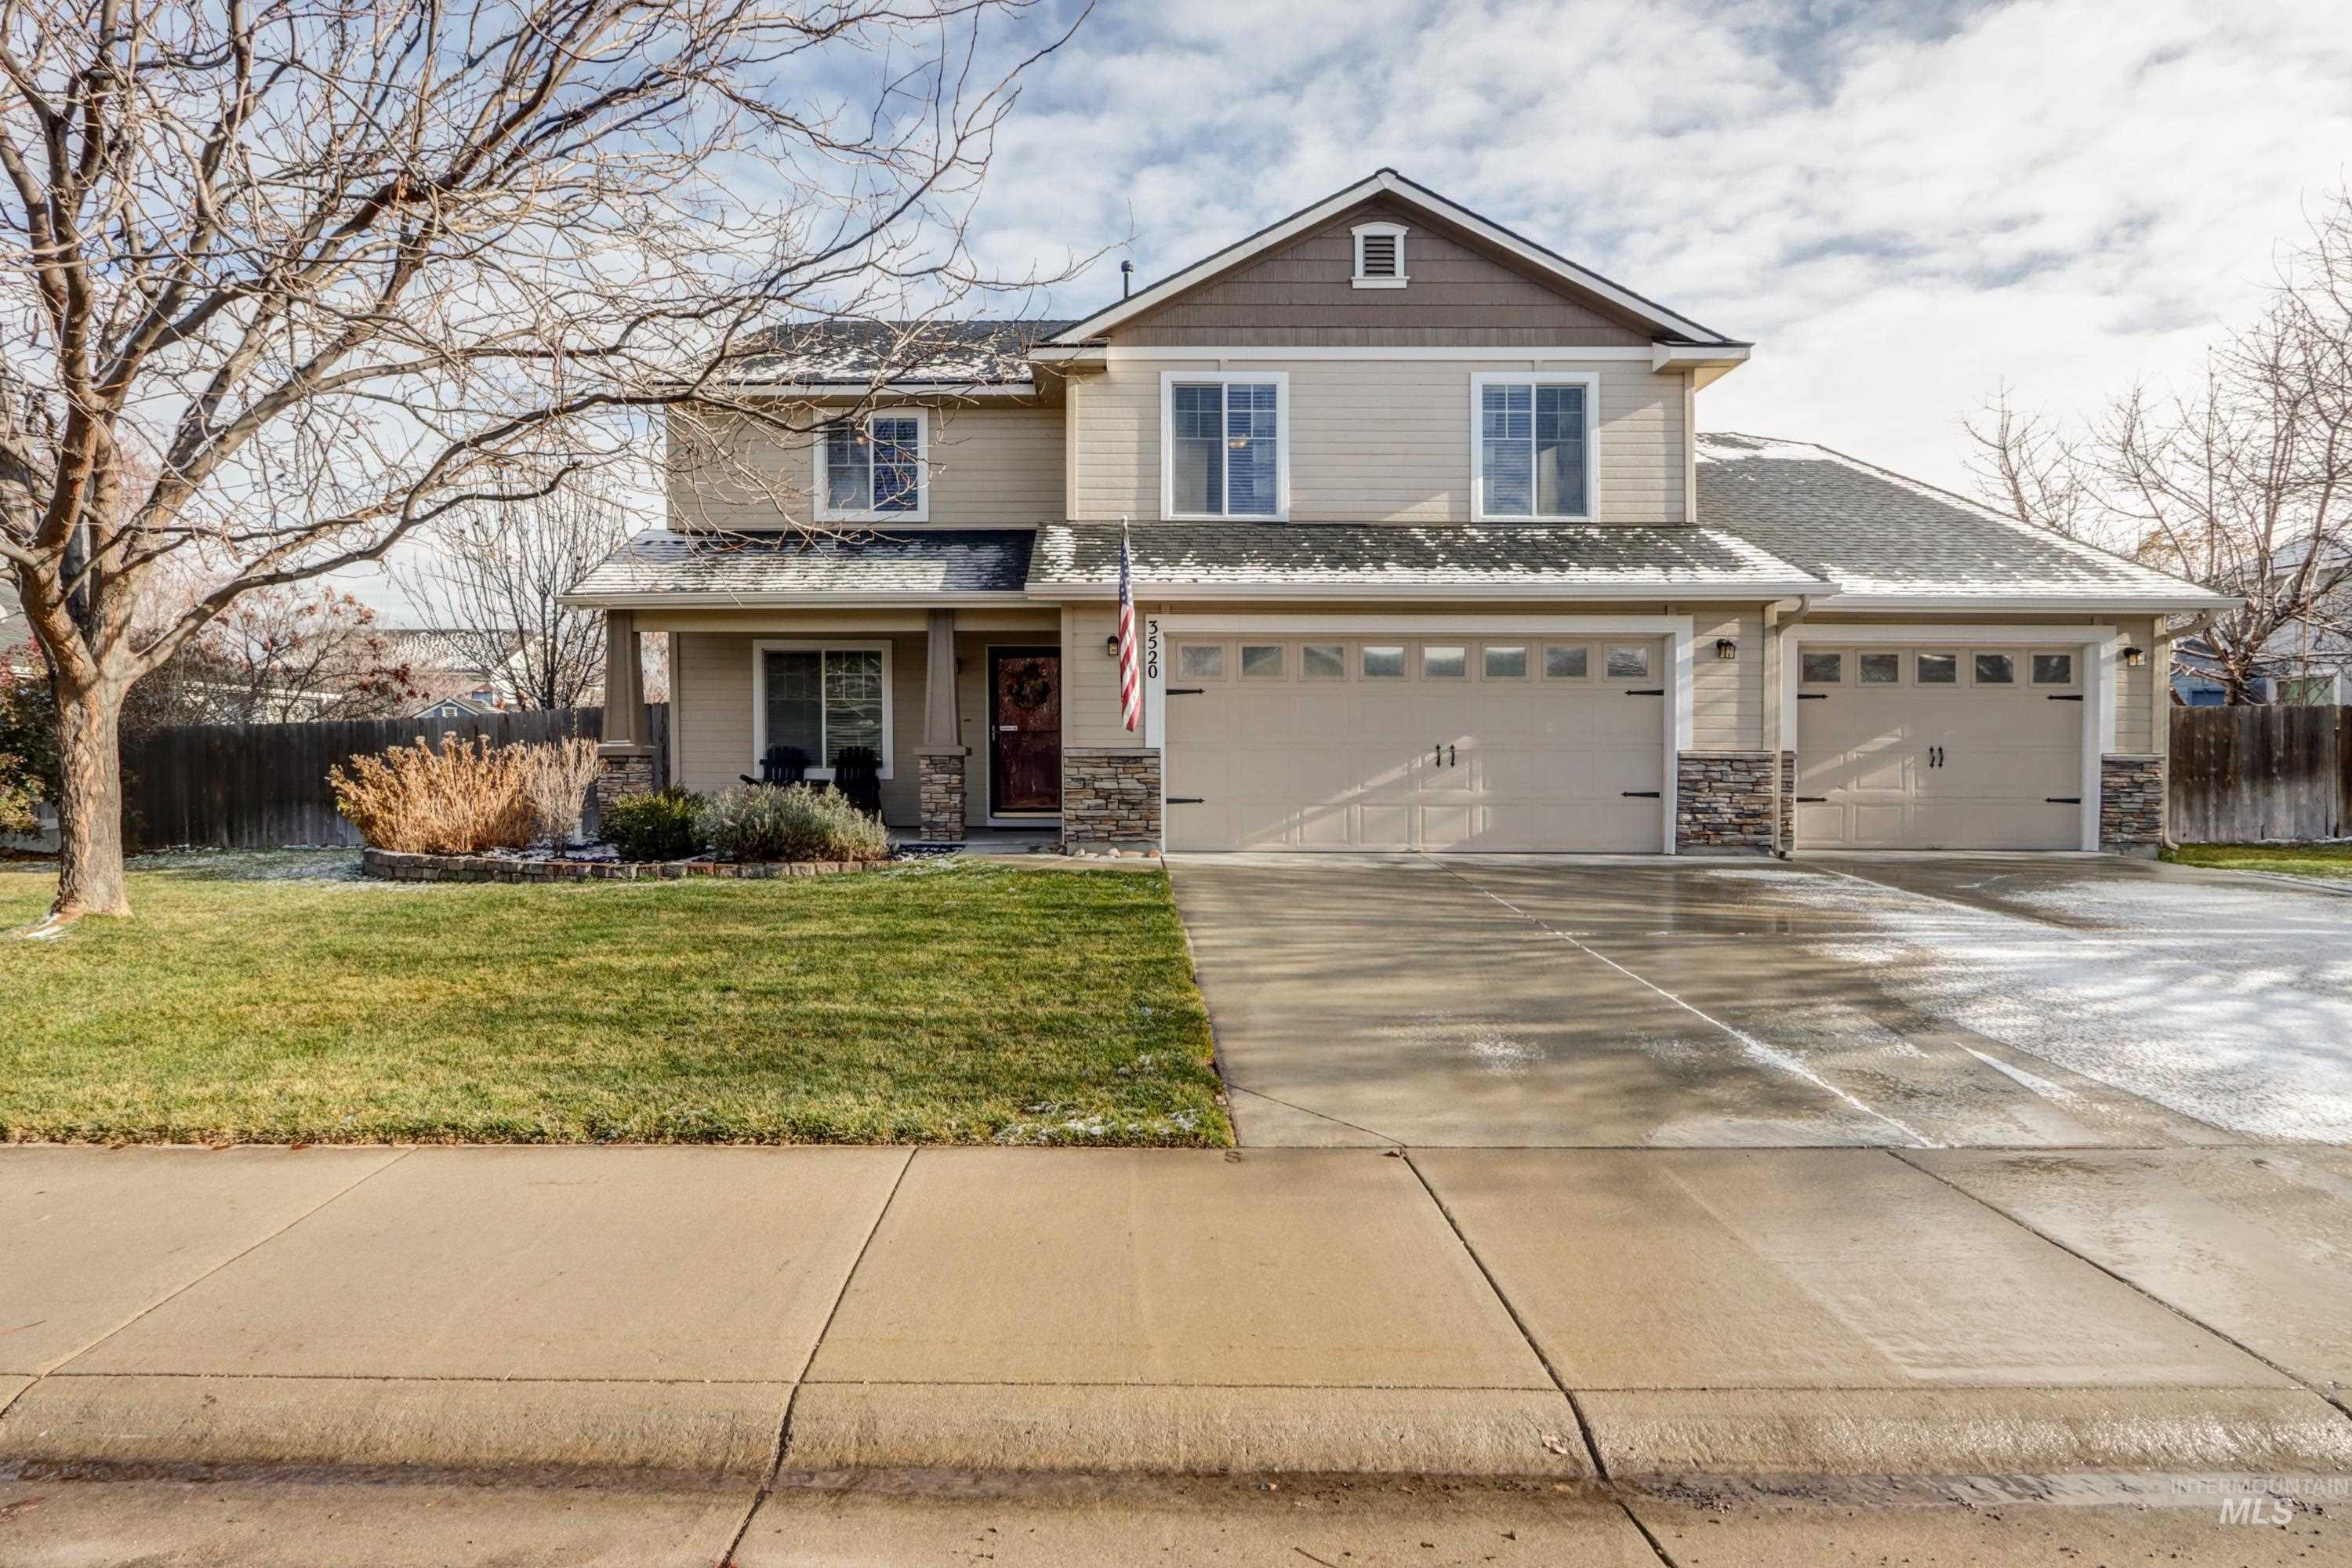 3520 S Heritage Ave, Boise, ID 83709